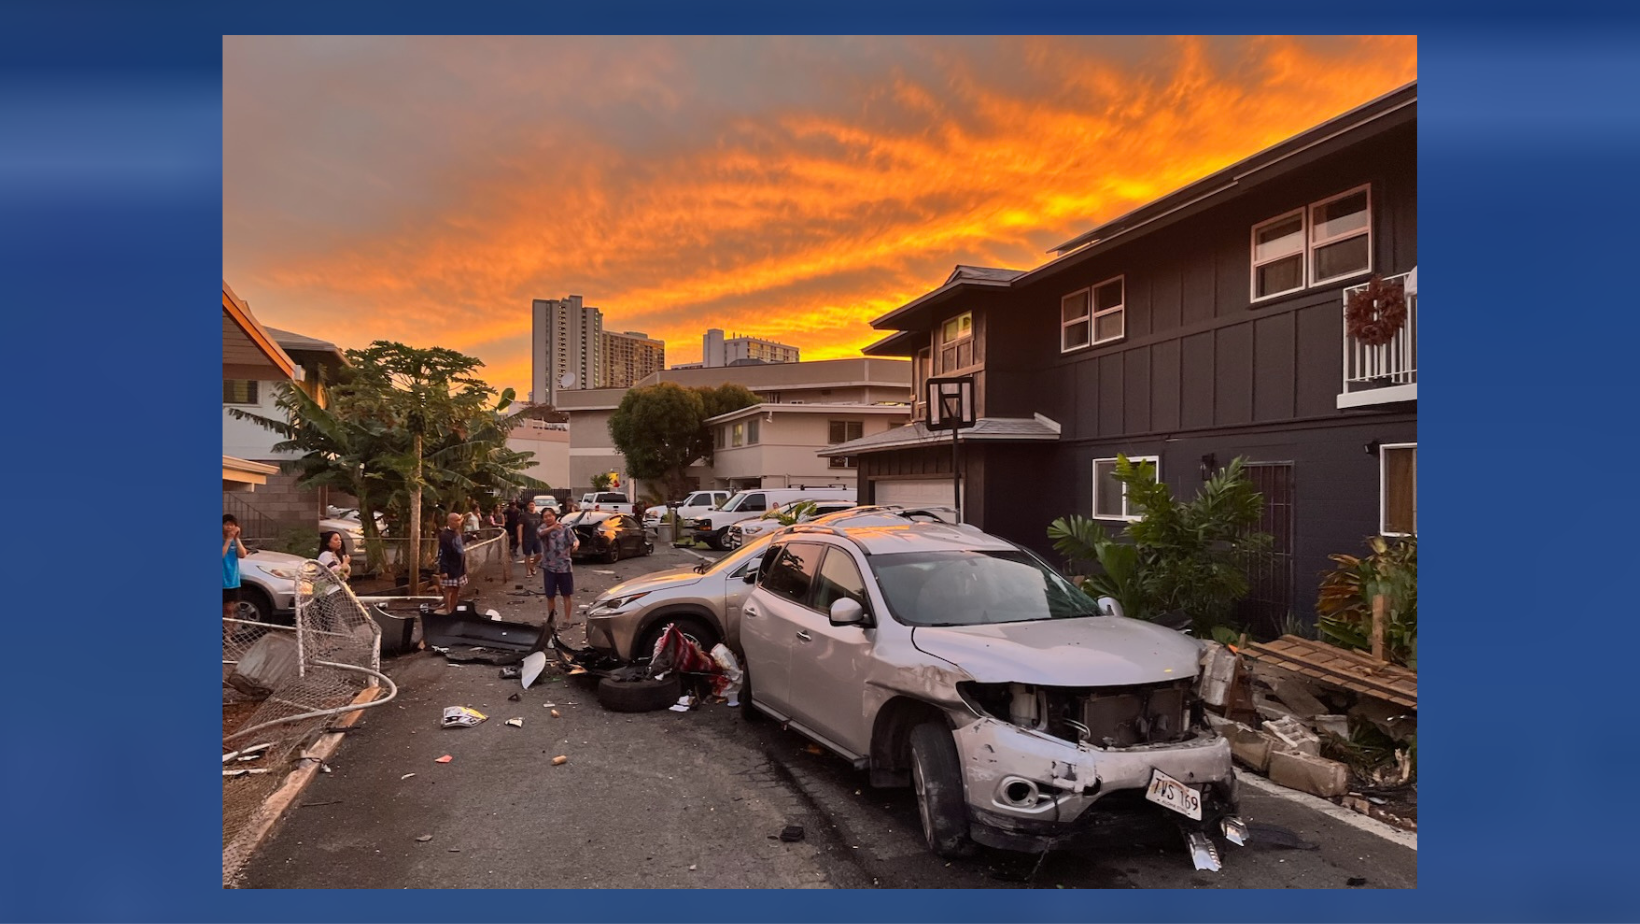 Debris and wrecked vehicles lay on the street after a car hits several homes on Saturday, June 3, 2023 in Honolulu, Hawaiʻi.